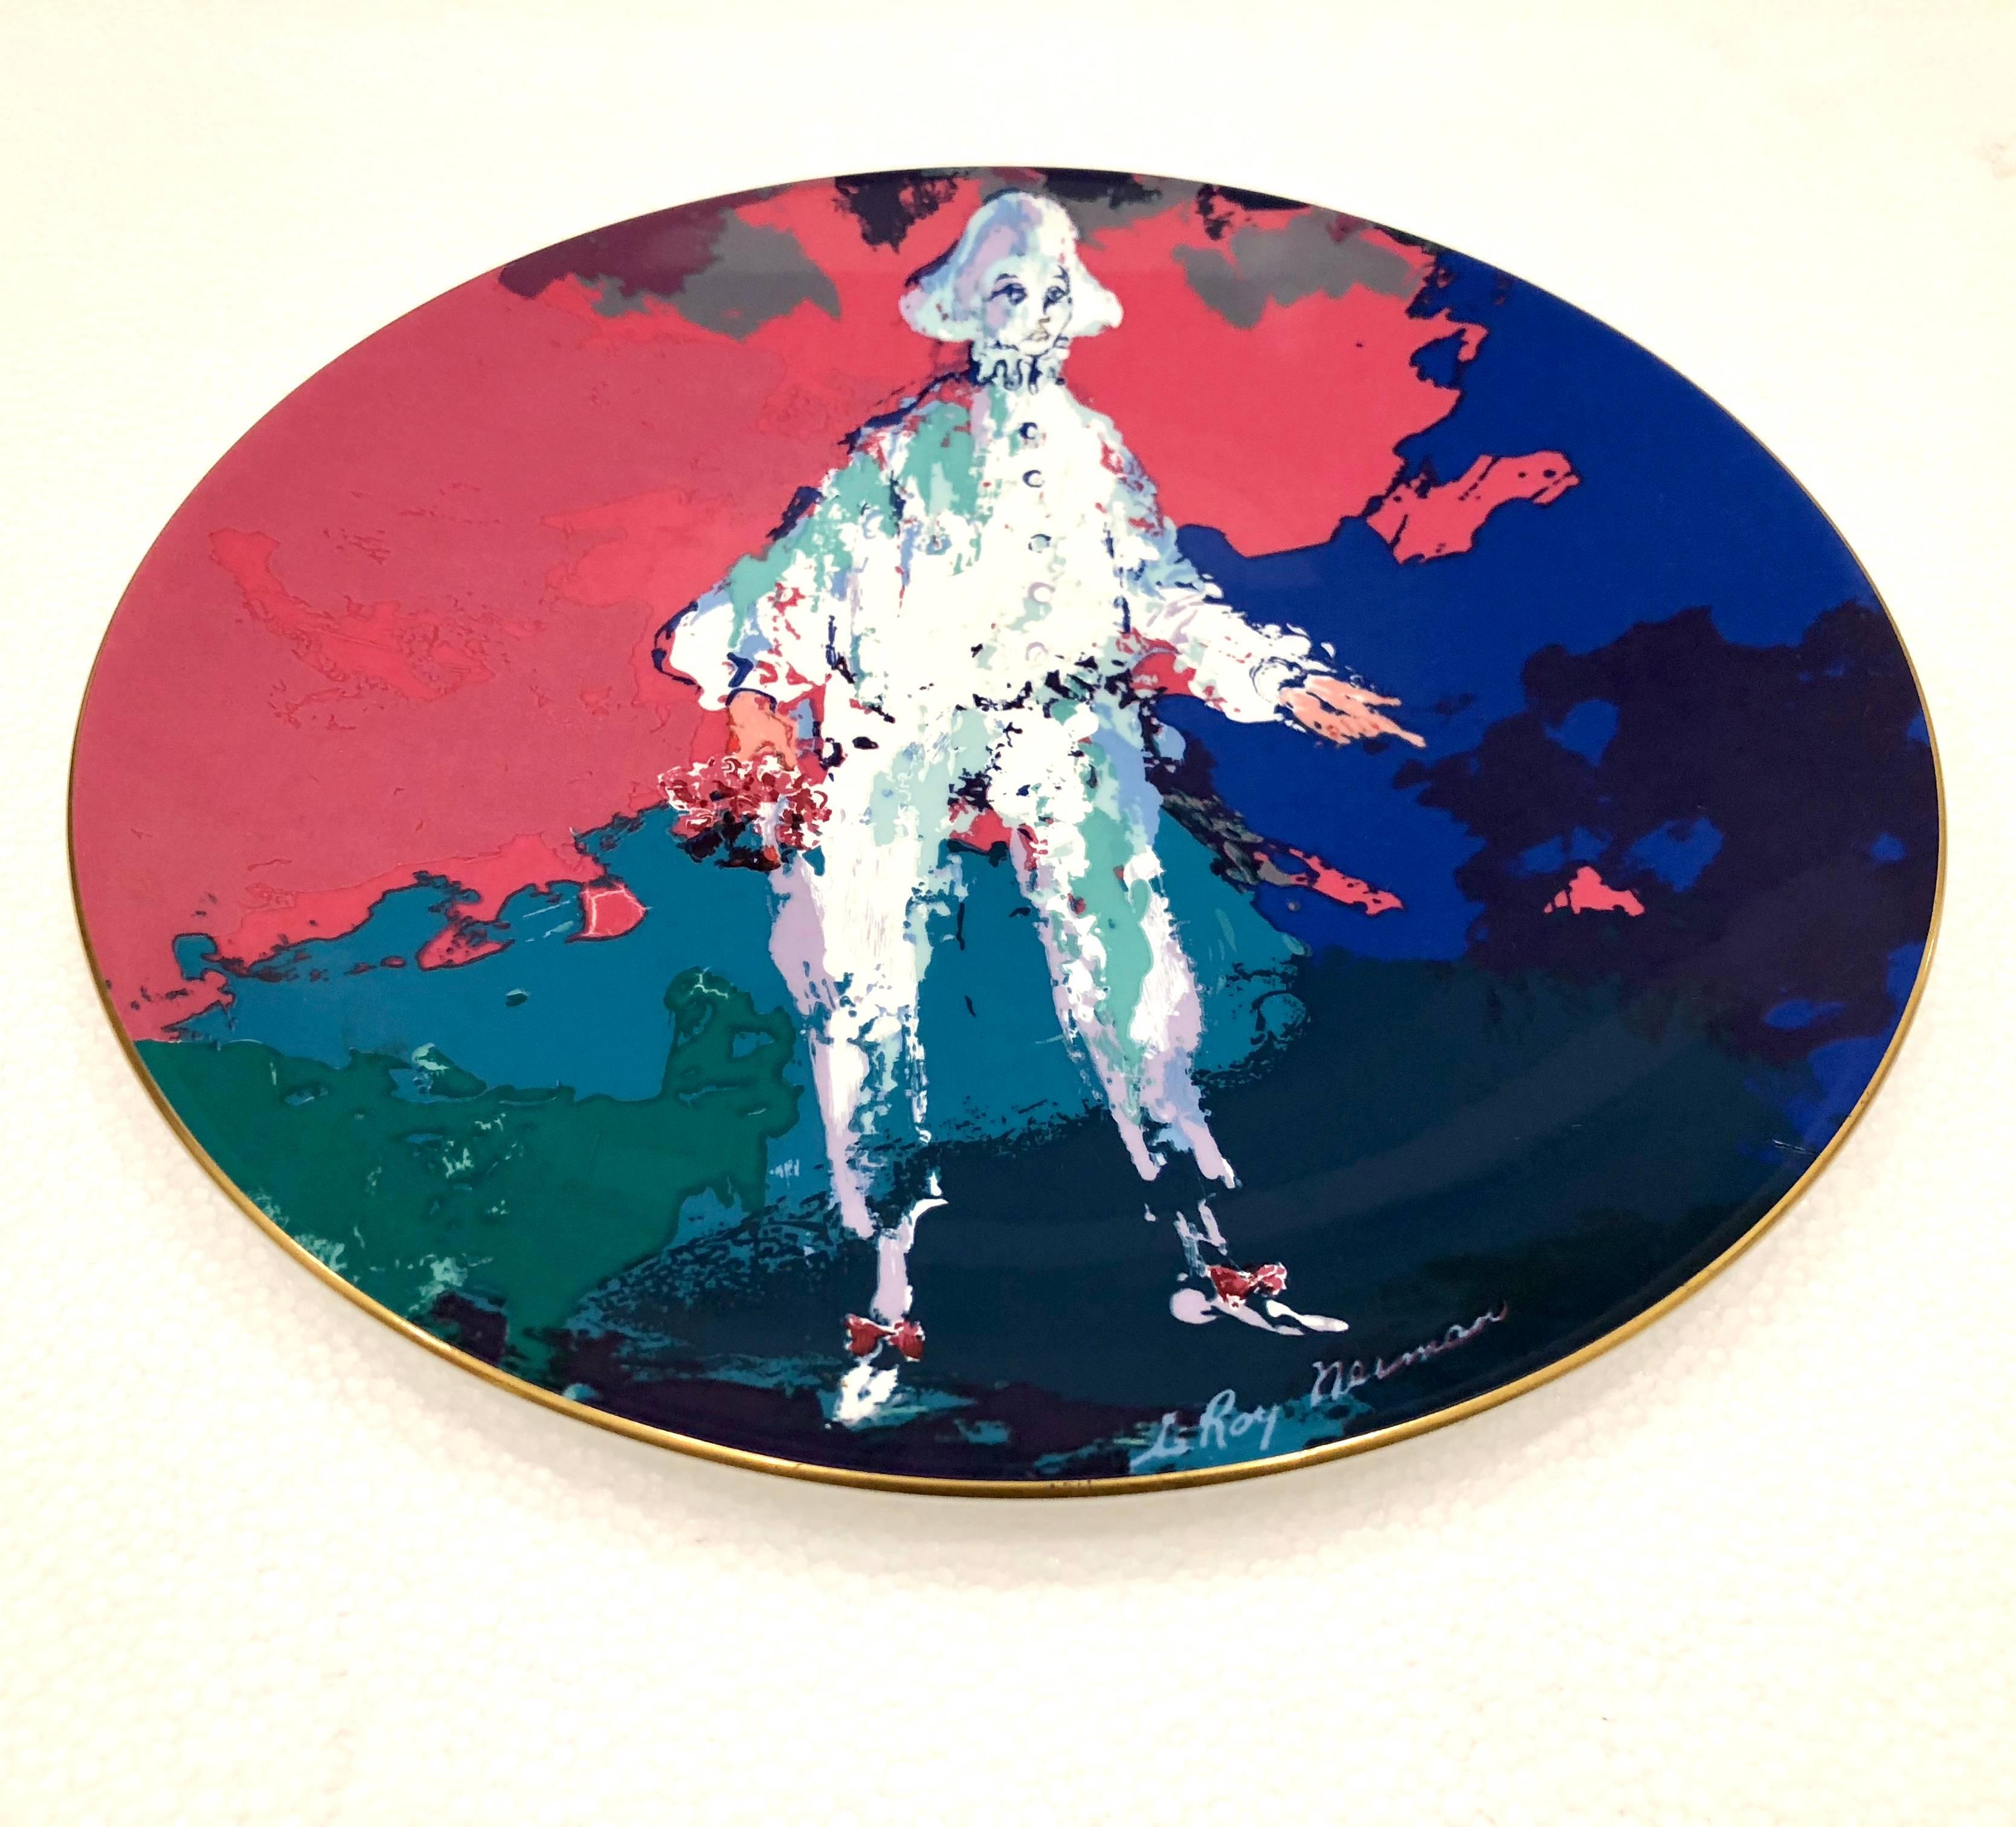 Beautiful decorative plate from 1975, by Leroy Neiman for Royal Daulton, great condition no chips or cracks or scratches.